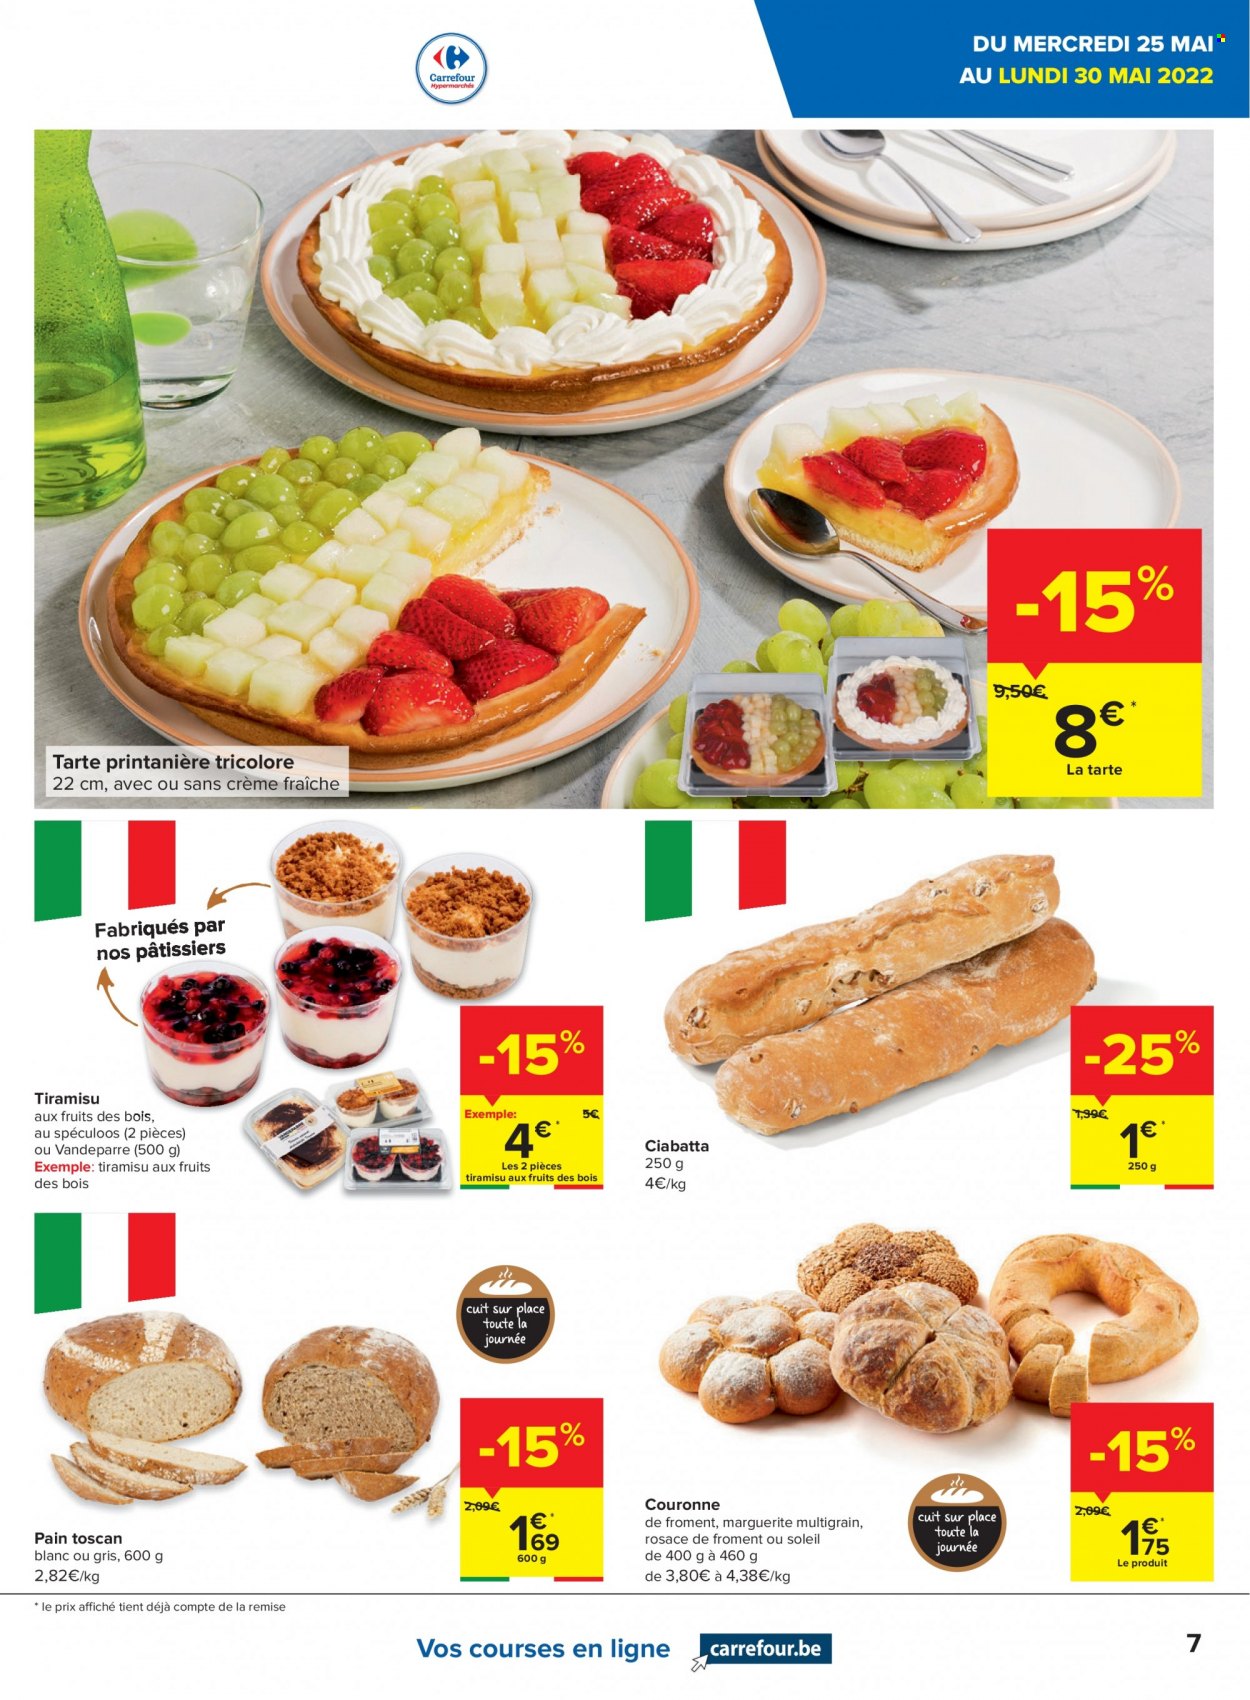 Catalogue Carrefour hypermarkt - 25.5.2022 - 31.5.2022. Page 7.